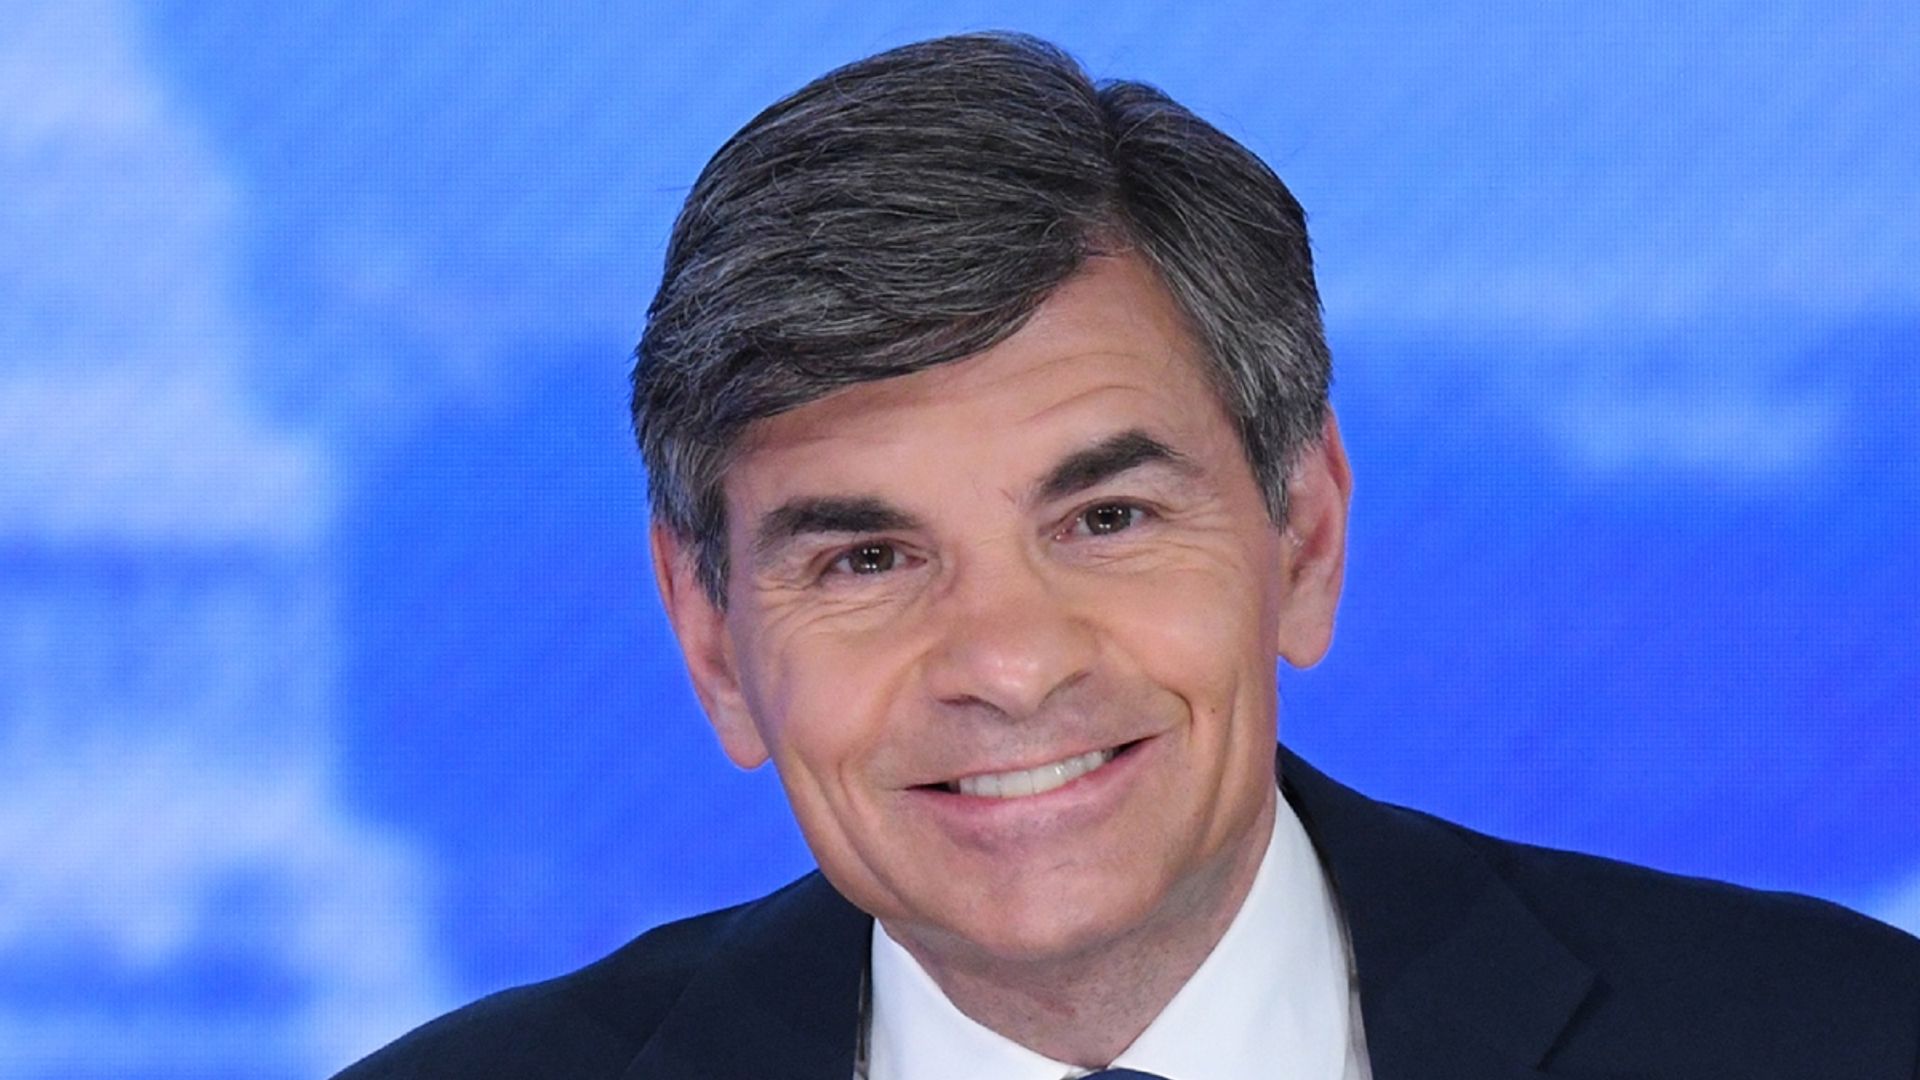 george-stephanopoulos-dancing-comment